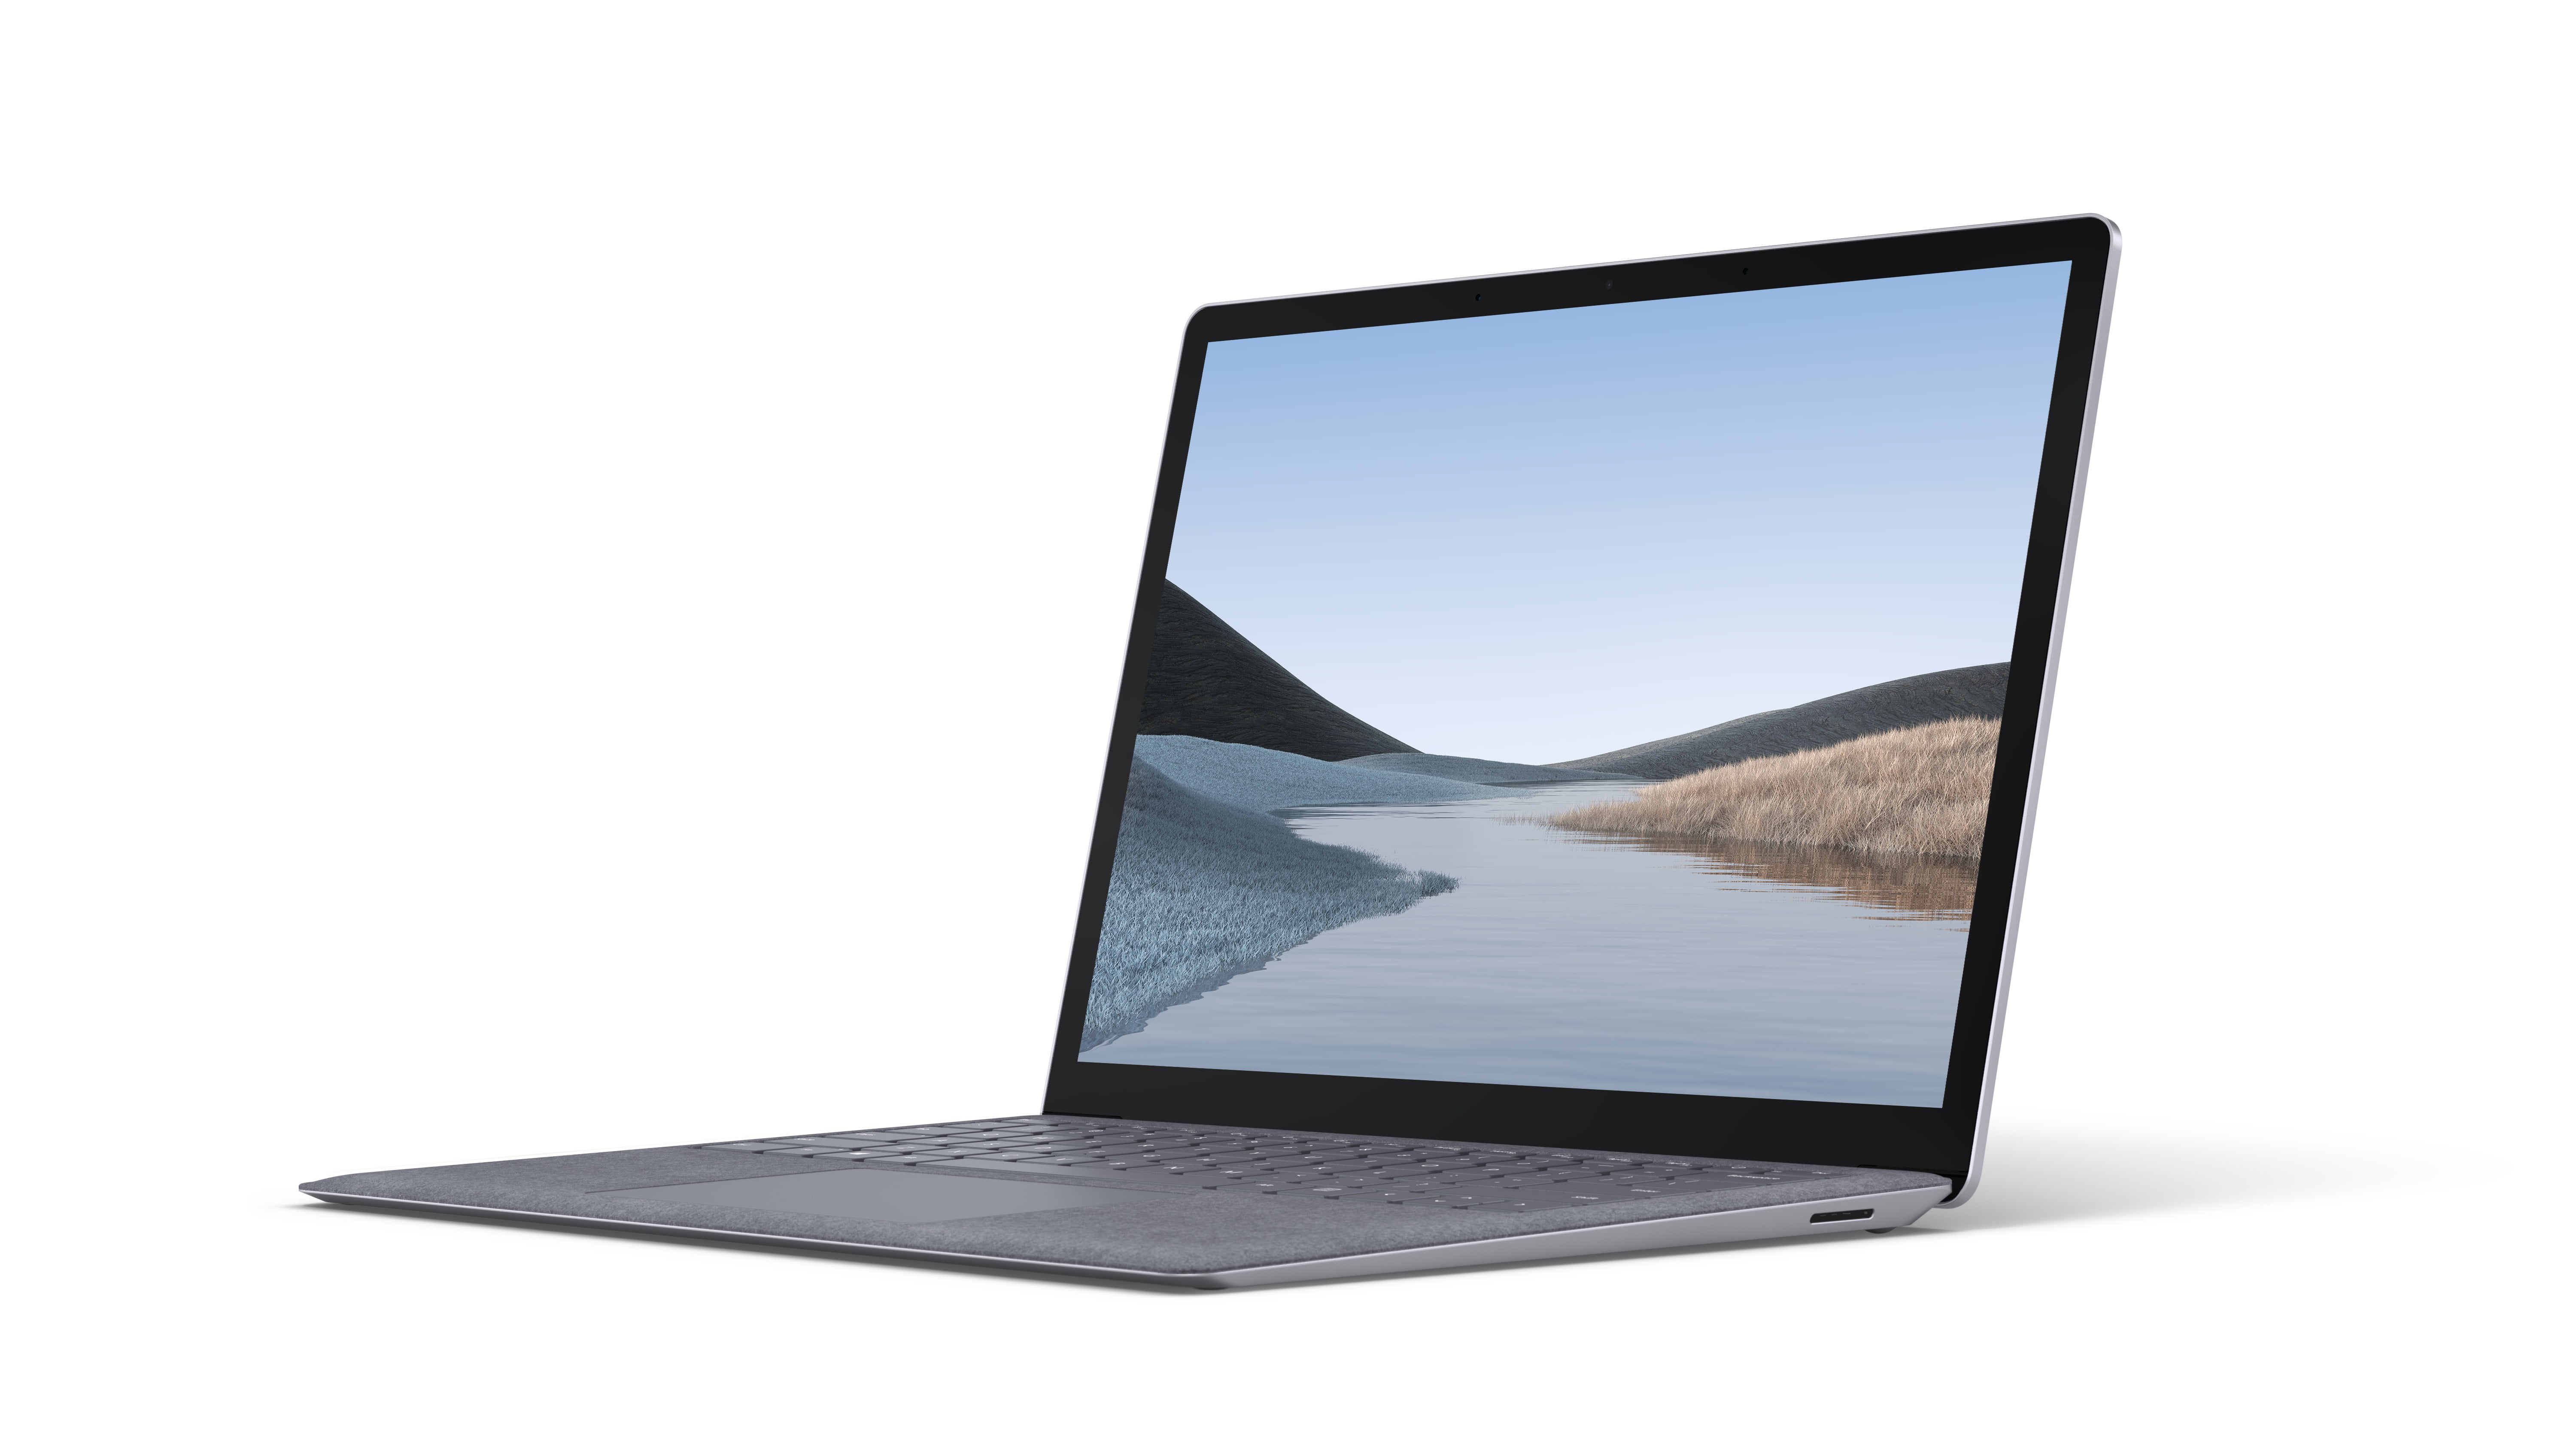 Microsoft Surface Laptop 3, 13.5" Touch-Screen, Intel Core i5-1035G7